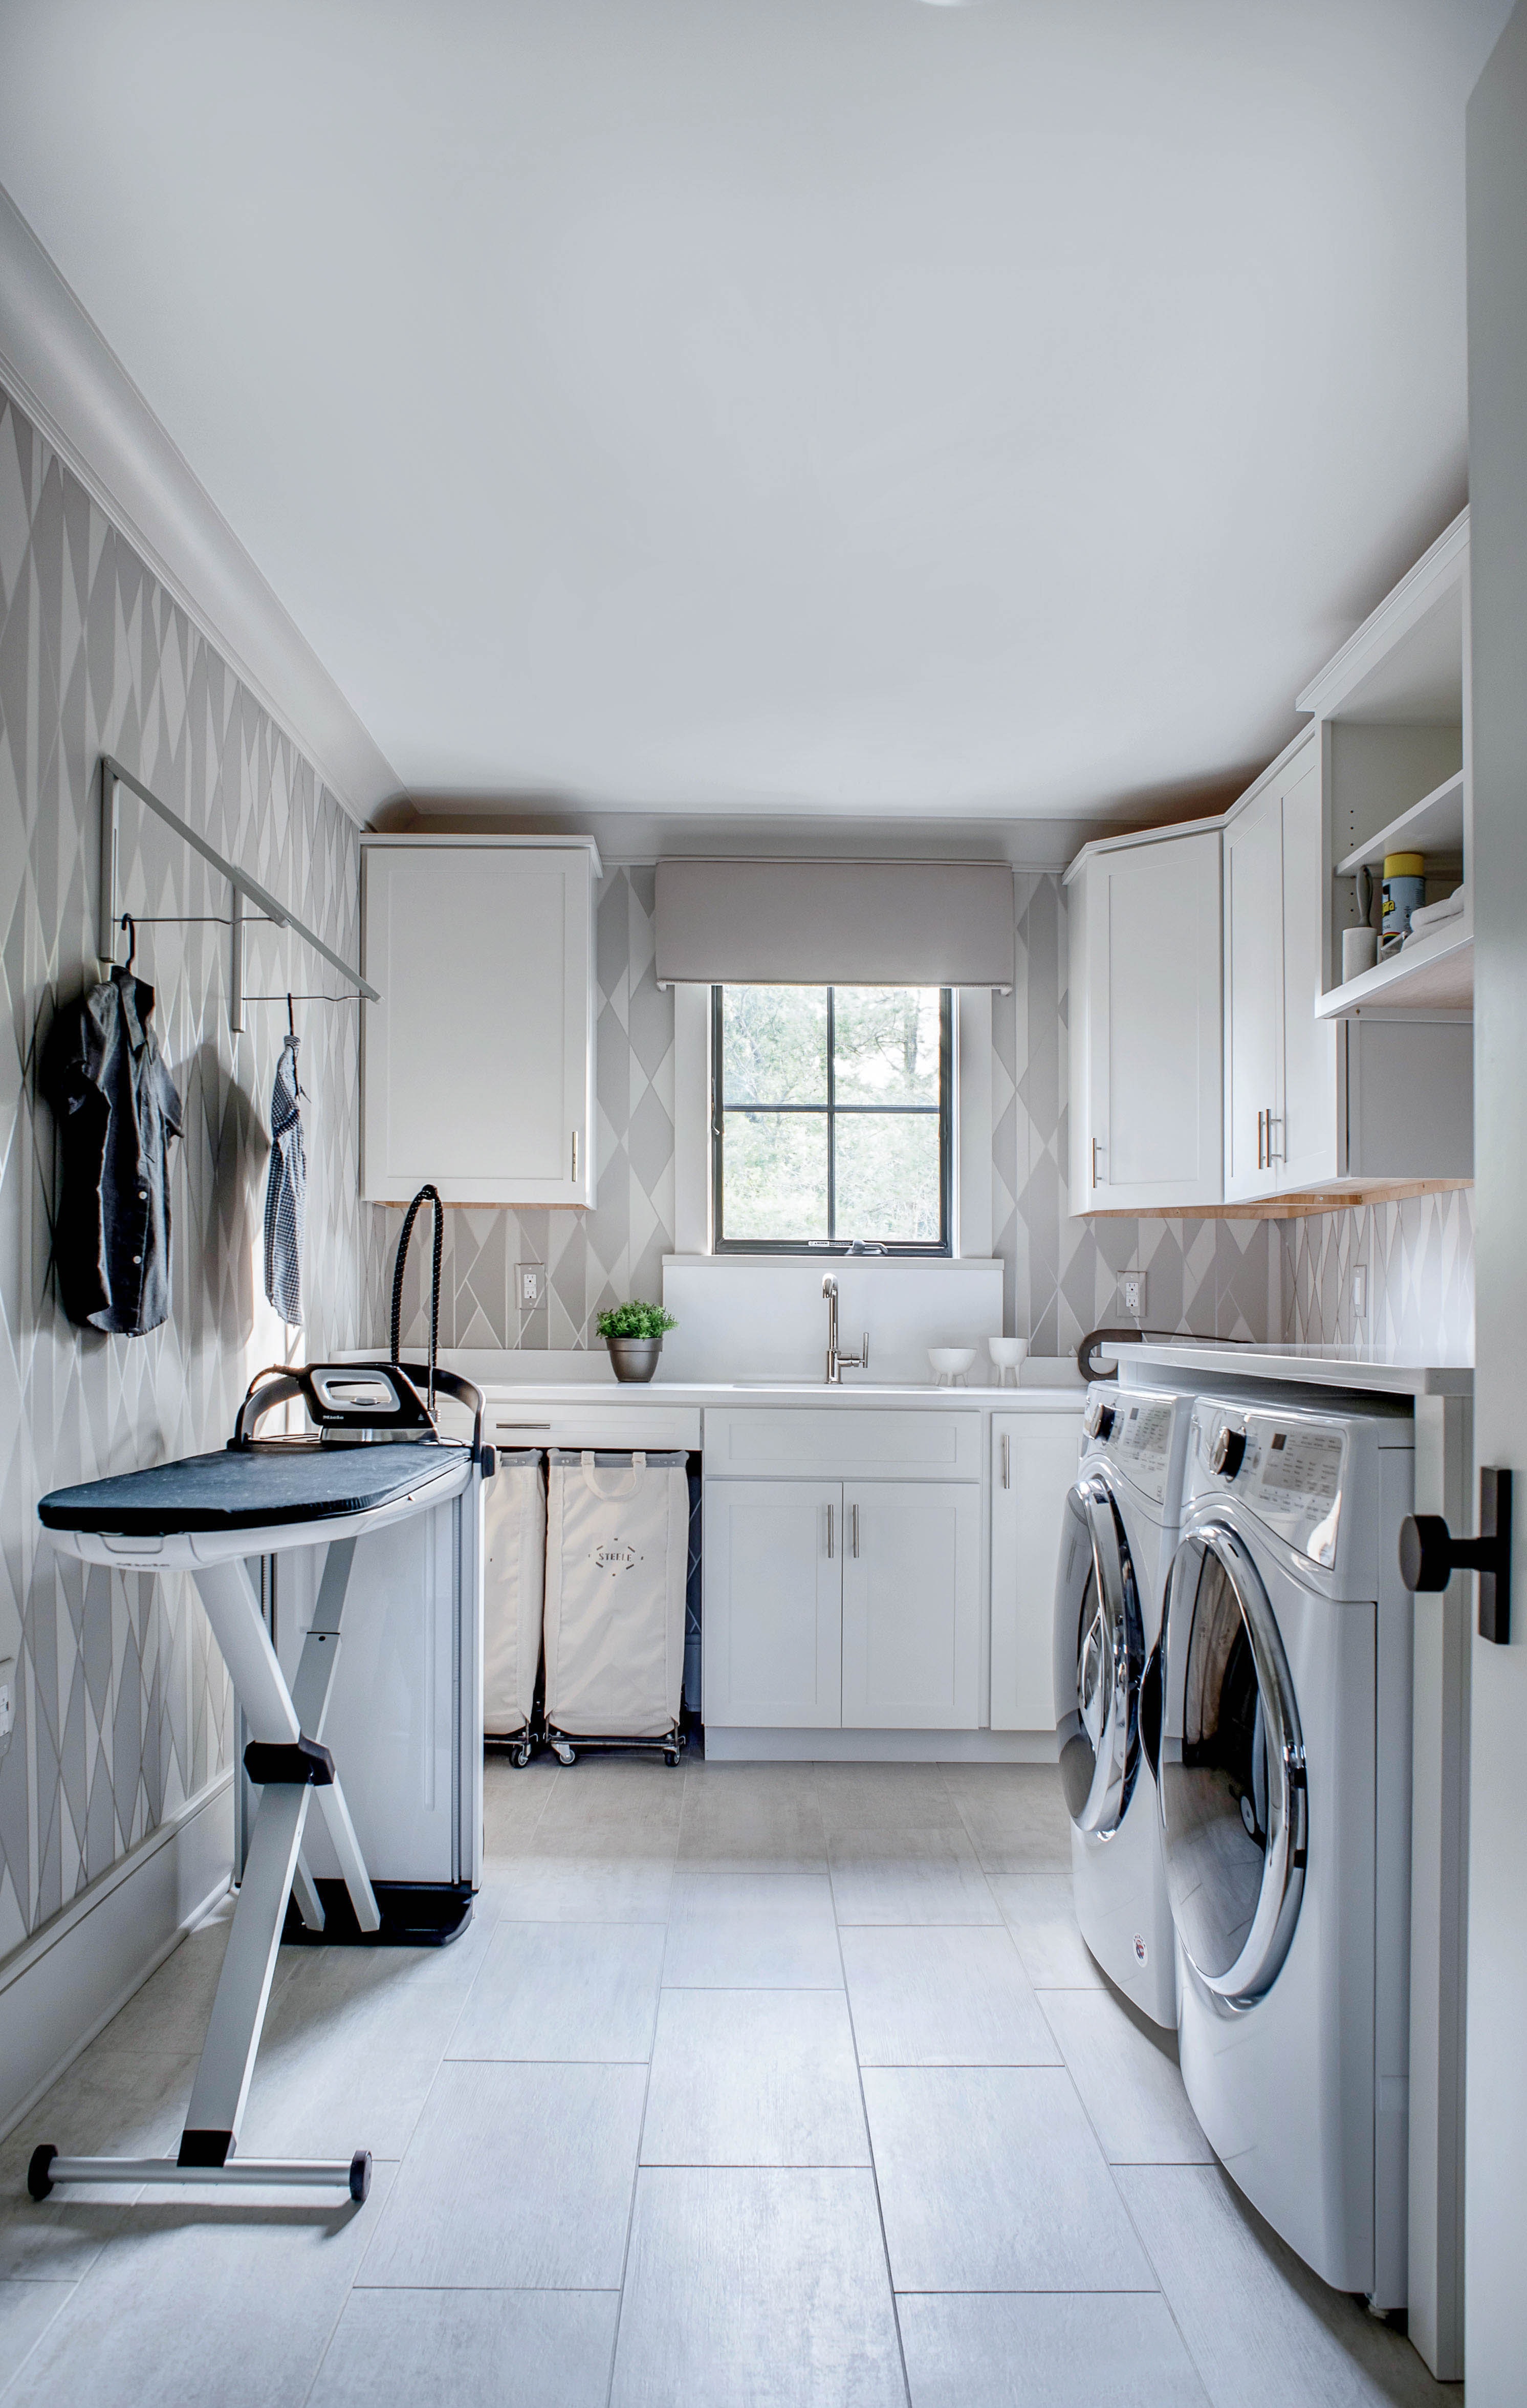 Laundry Rooms With Geometric - HD Wallpaper 